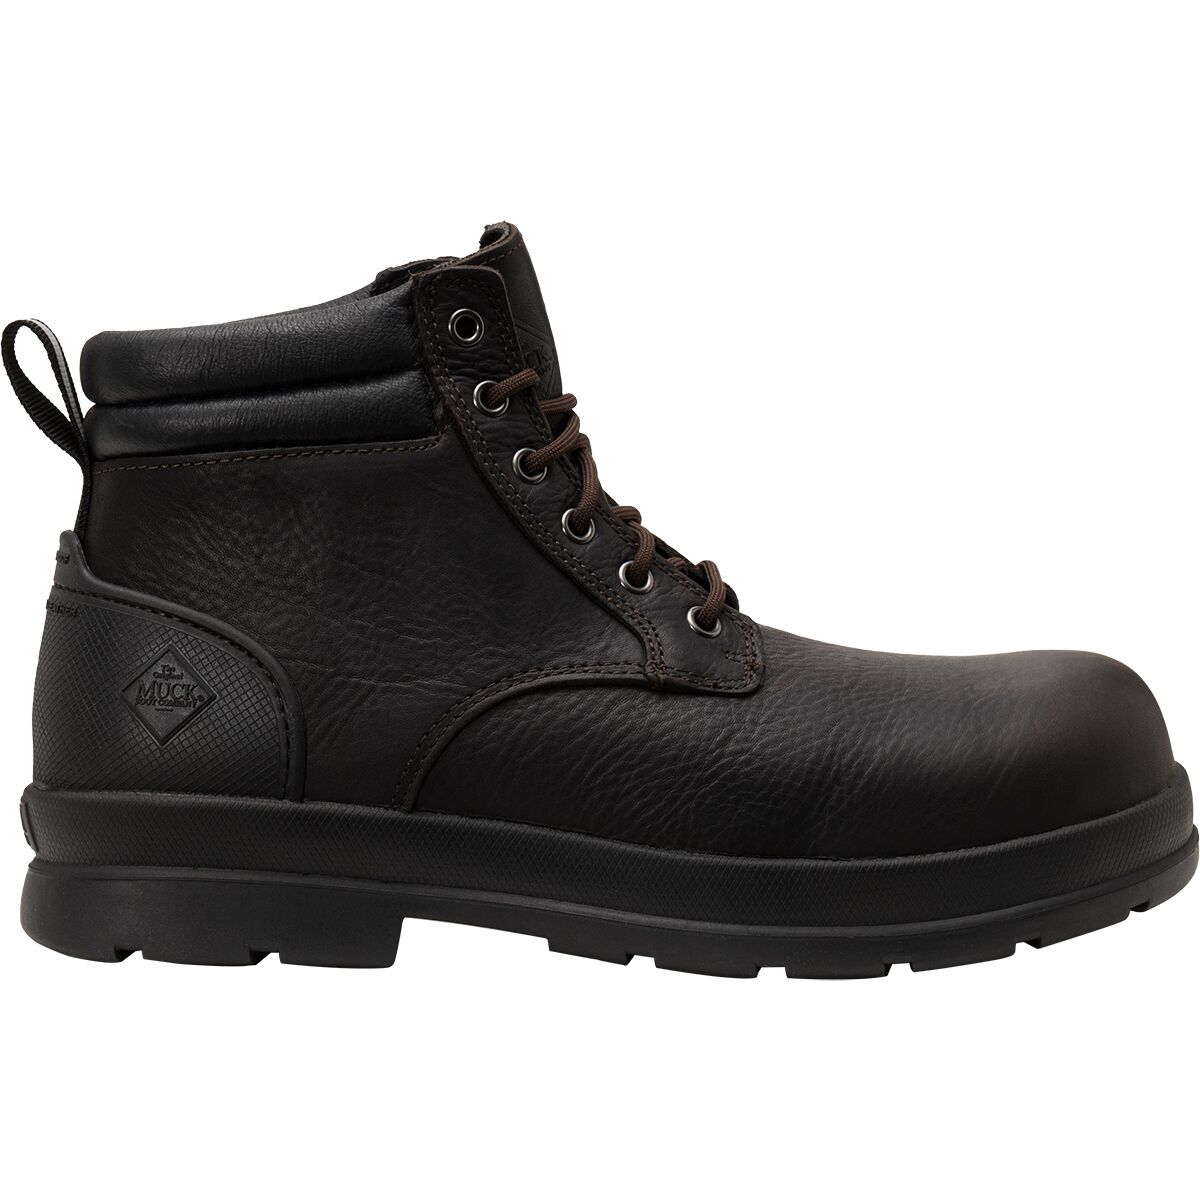 Muck Boots Chore Farm Leather Lace CT Med Boot - Men's